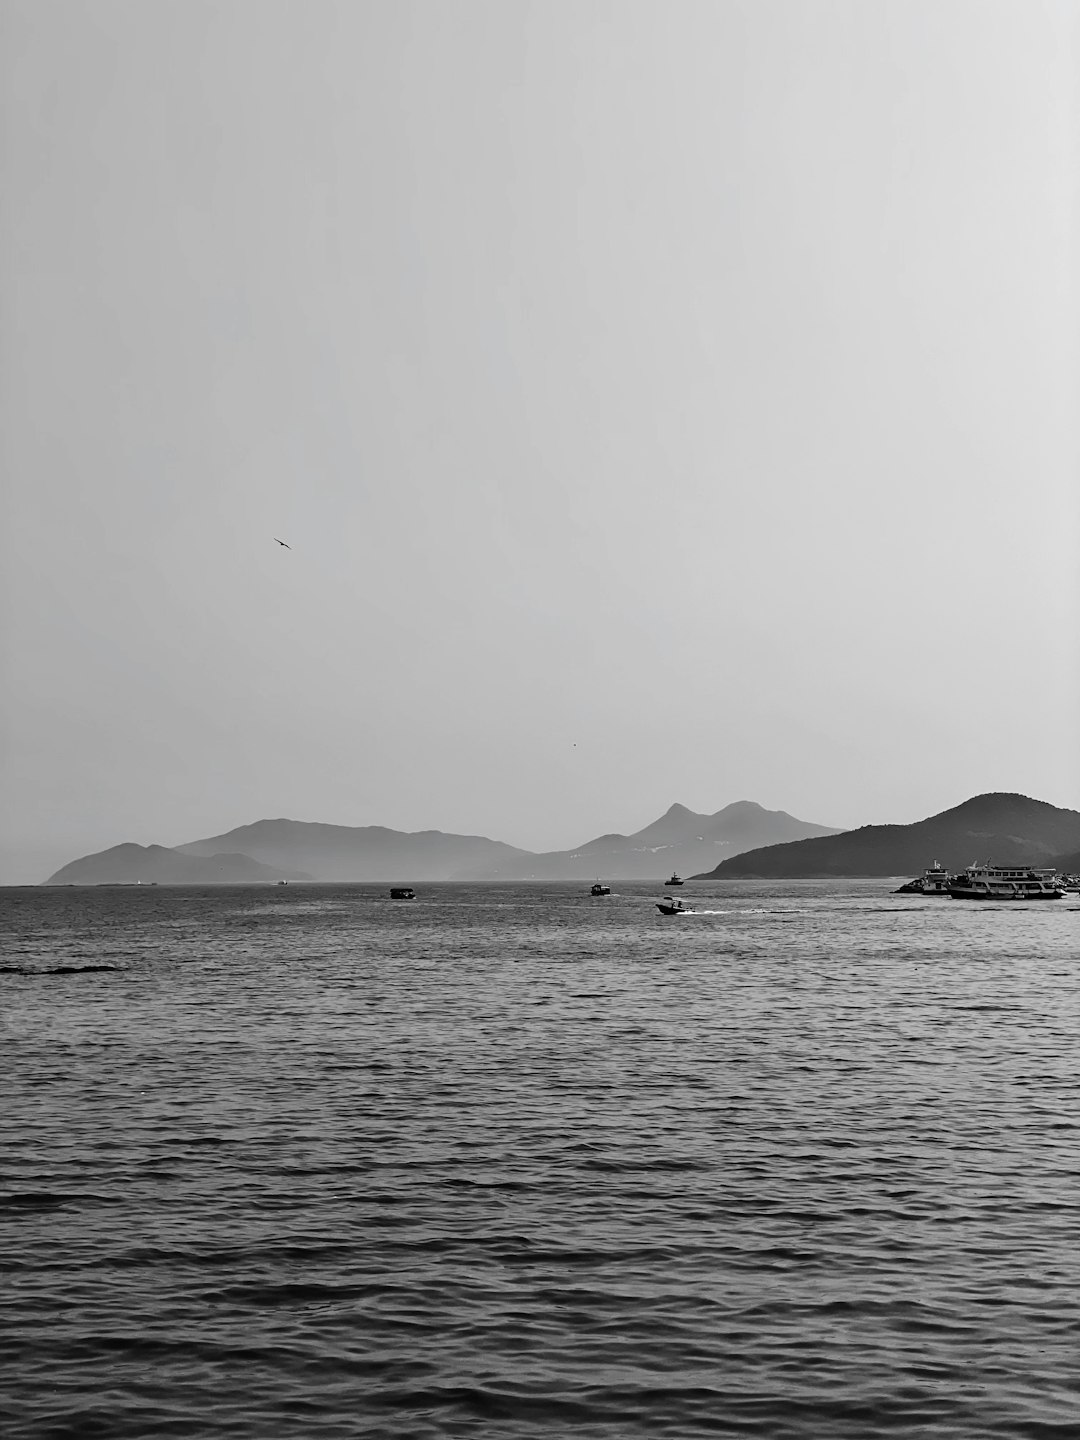 grayscale photo of body of water near mountain